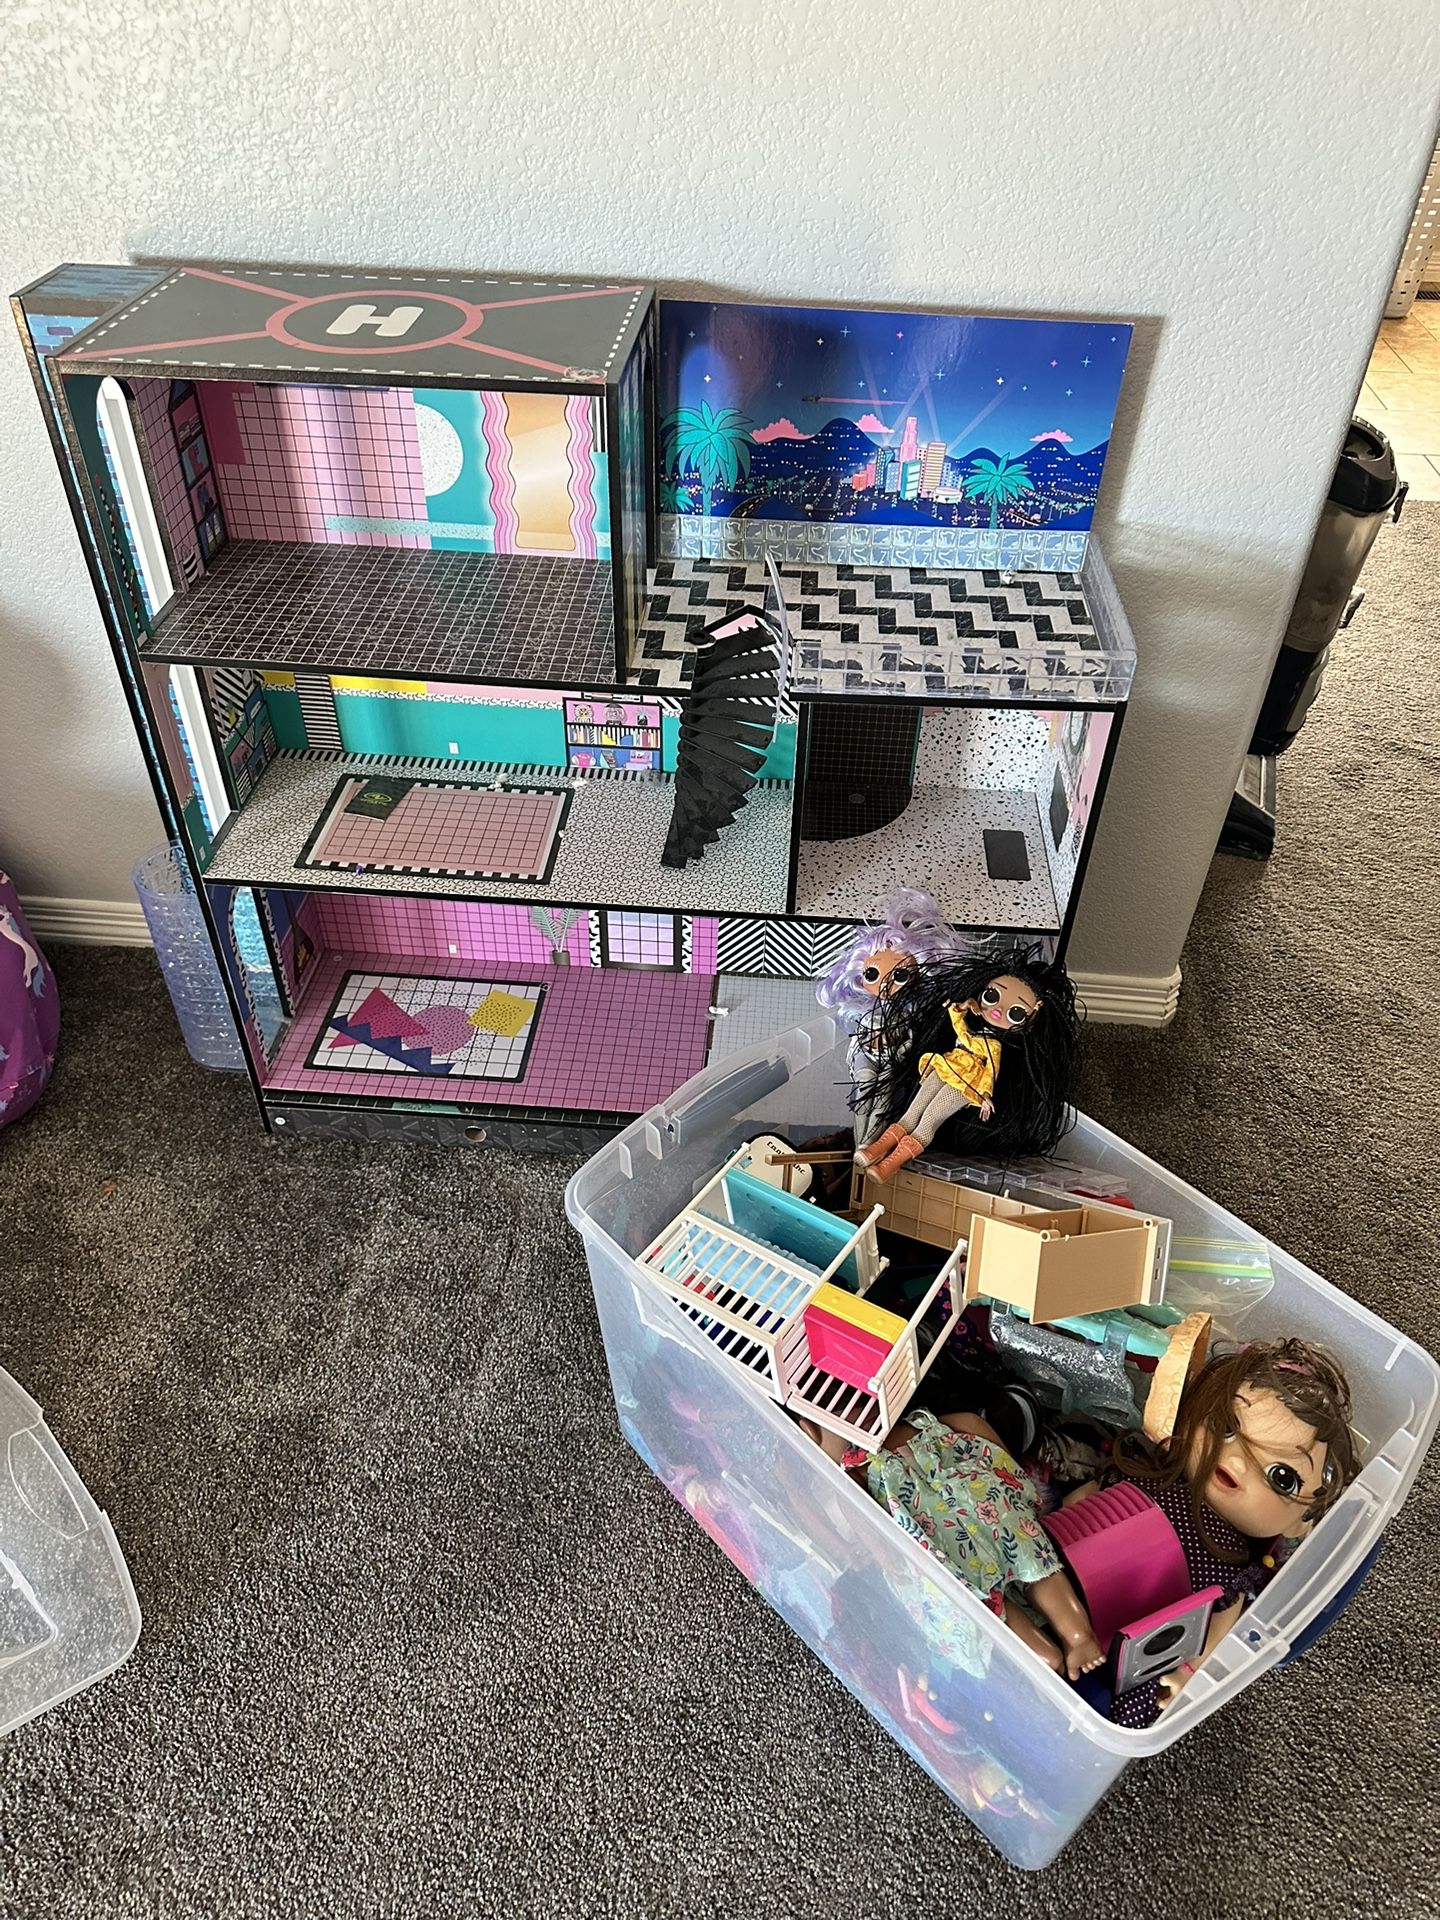 LOL Doll House With Dolls- Accessories Included 